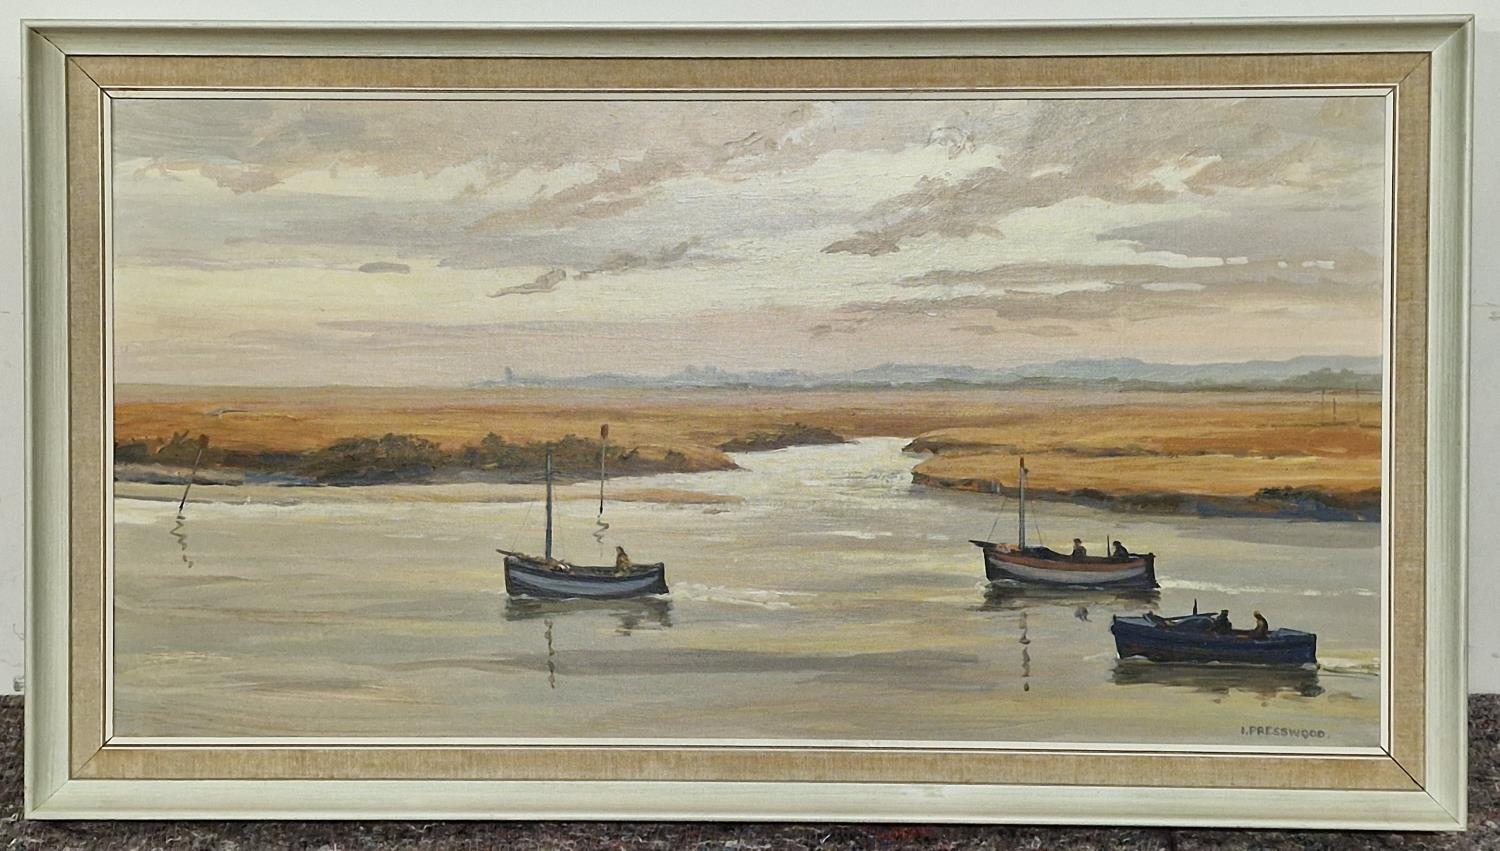 Irene Presswood: Vintage framed oil on board painting "Welk Boats Leaving on the Early Tide"